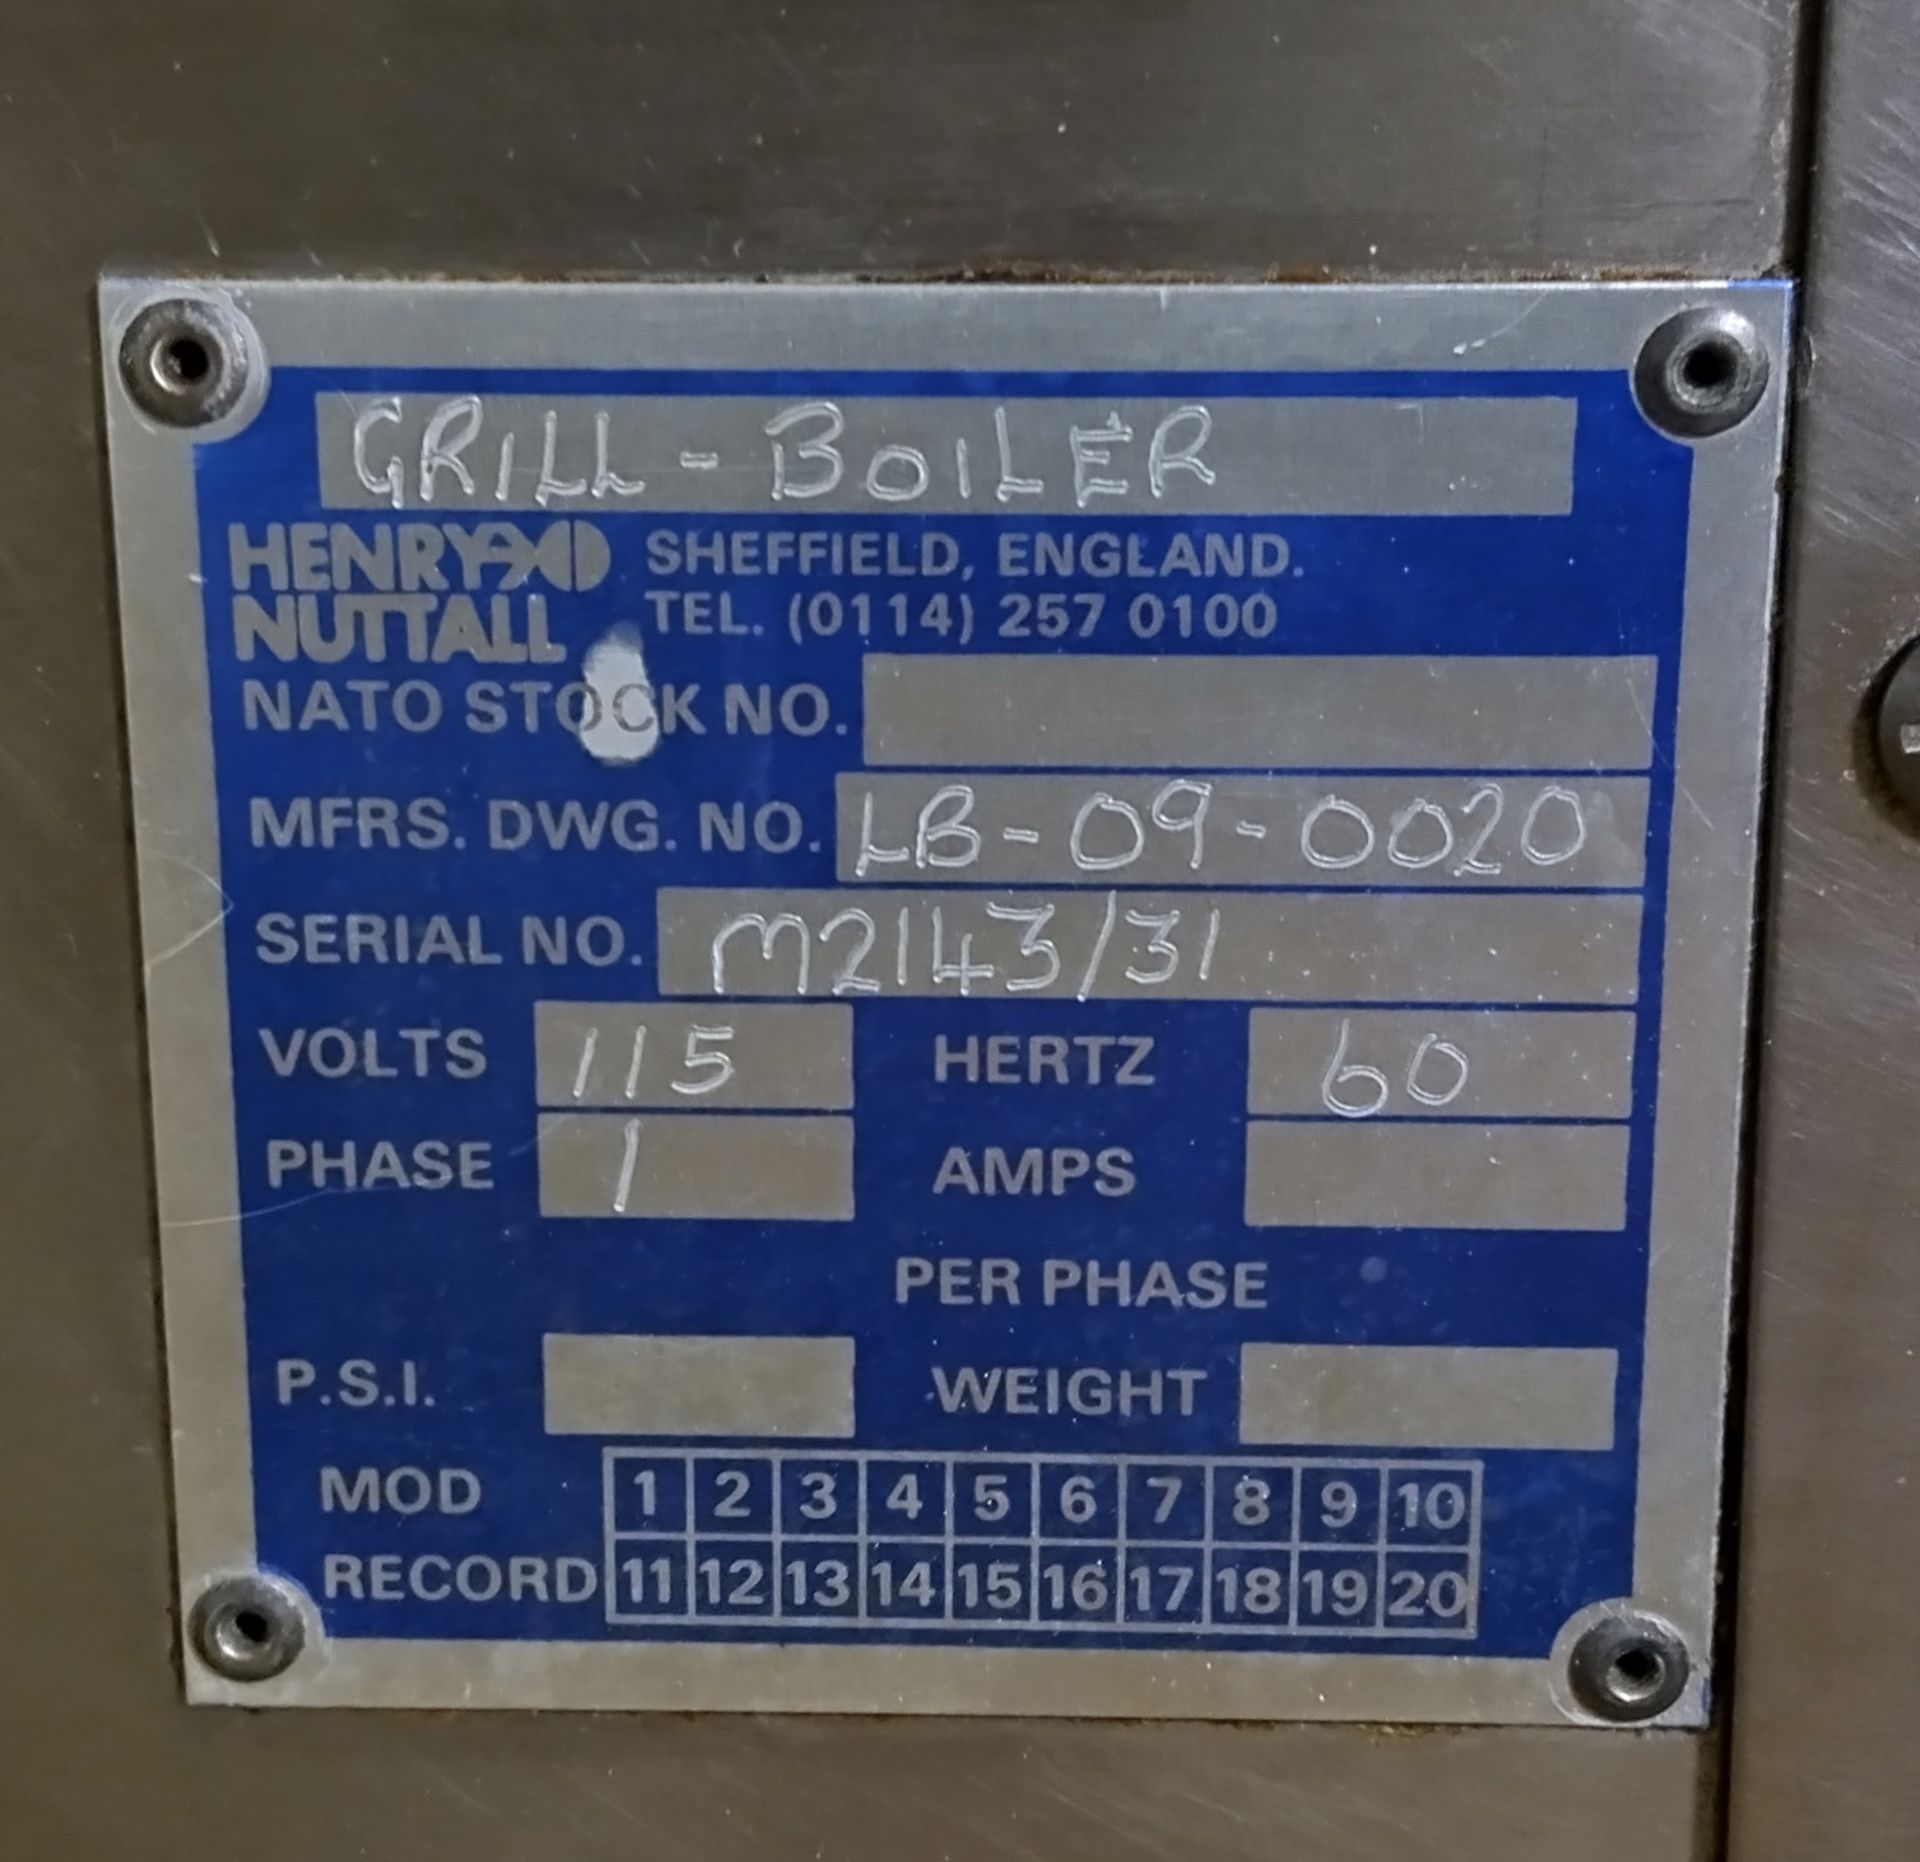 Henry Nuttall LB-09-0020, stainless steel electrically heated grill-boiler - 115V - 1ph - 60Hz - Image 3 of 3